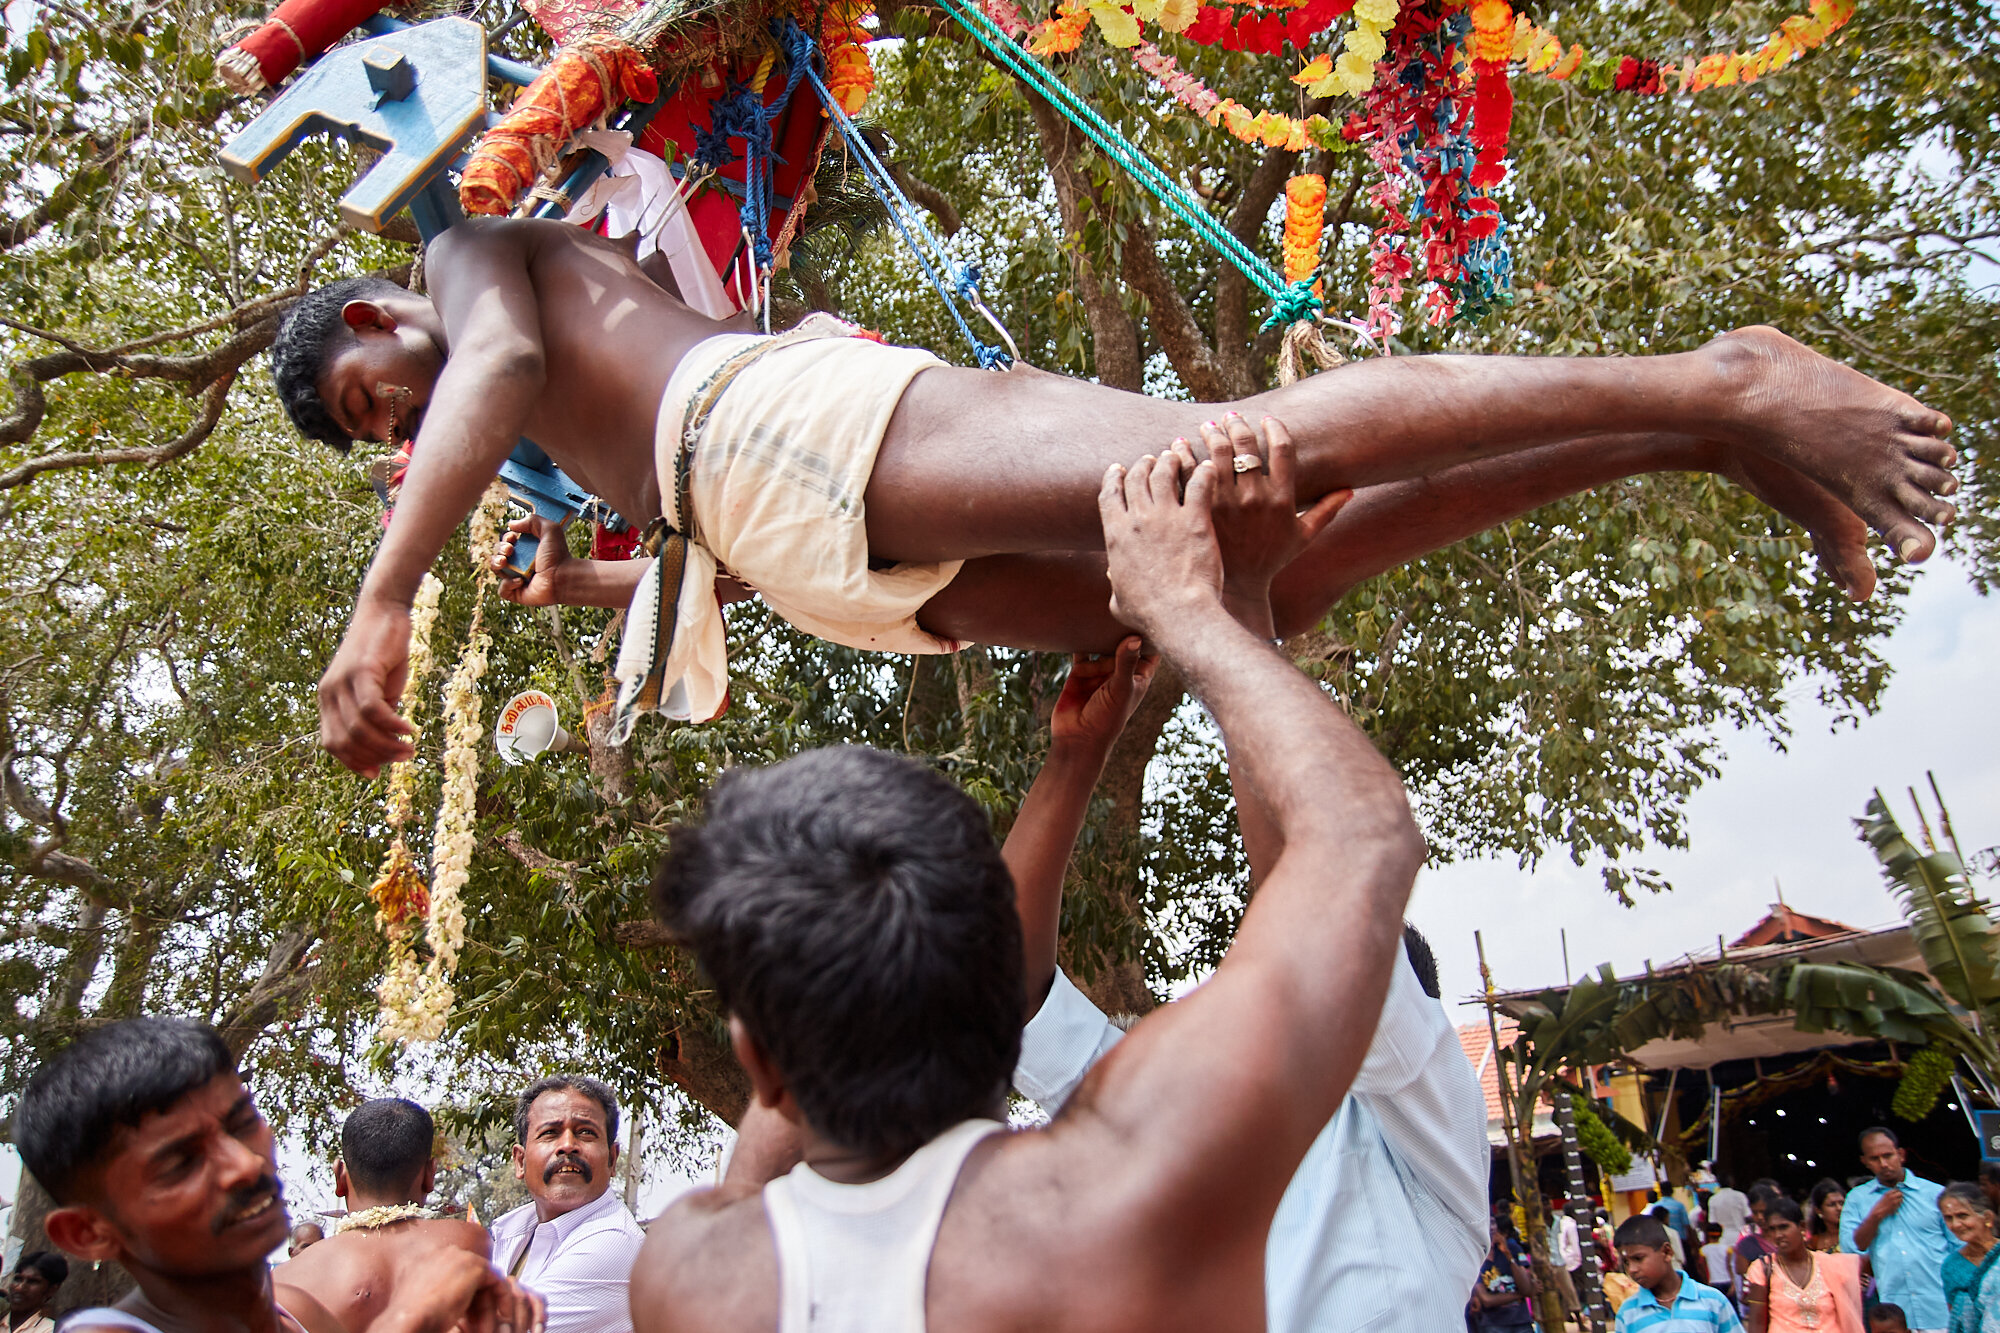  Often the rituals end up unexpectedly. Here a devotee just fainted while hanging on hooks. I once saw a man rushed into an emergency department where I worked as a medical officer with multiple fractures in all four of his limbs afte a fall from a s